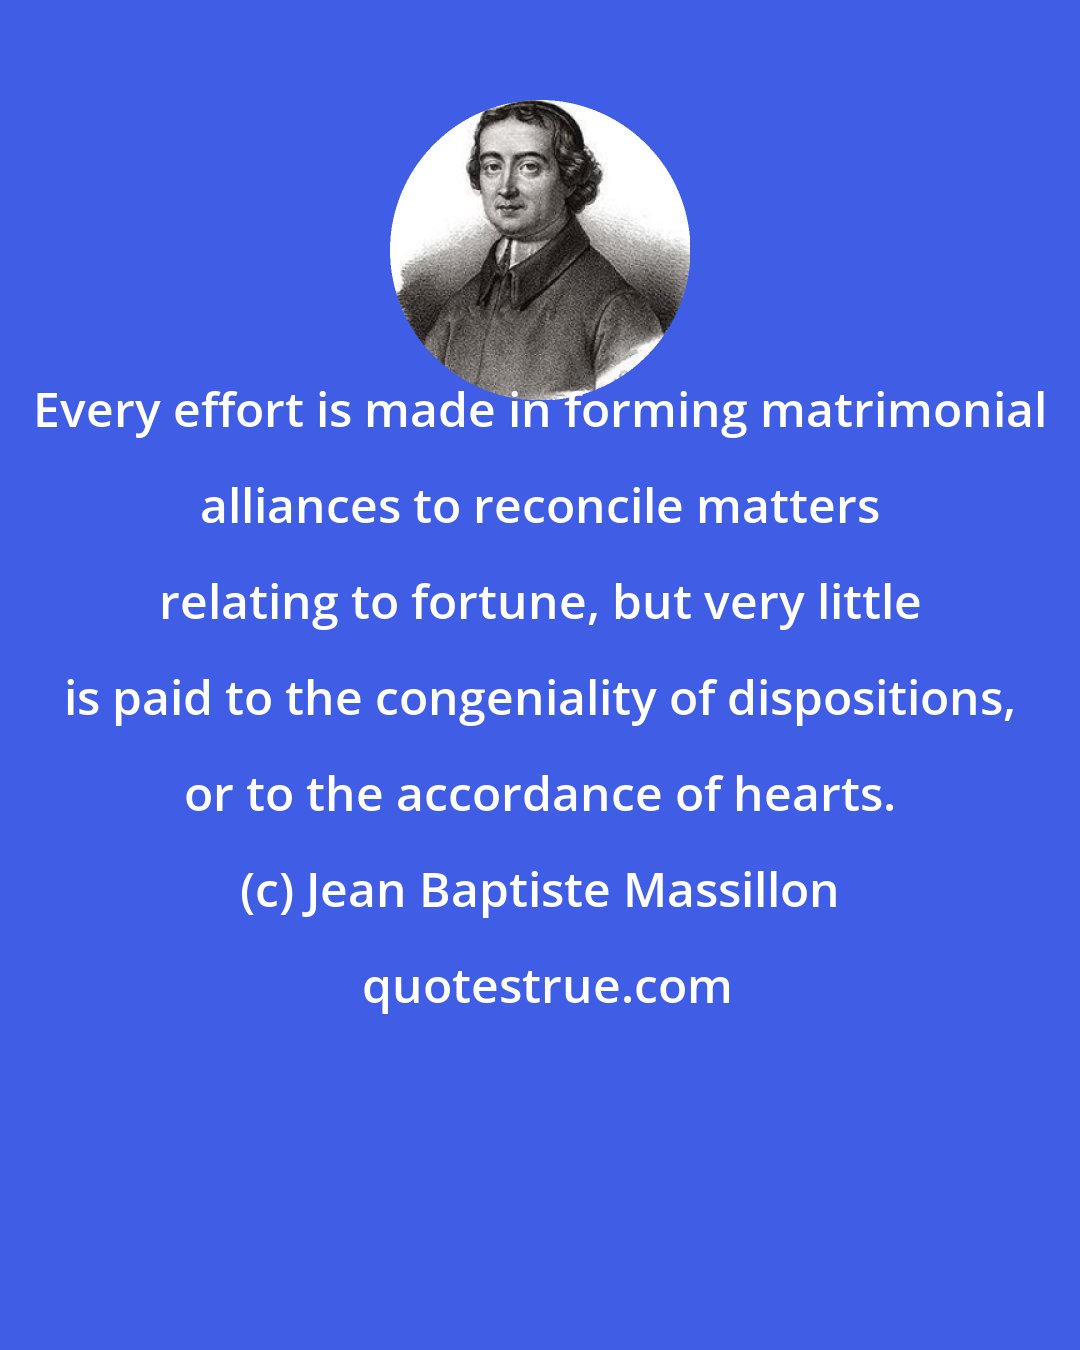 Jean Baptiste Massillon: Every effort is made in forming matrimonial alliances to reconcile matters relating to fortune, but very little is paid to the congeniality of dispositions, or to the accordance of hearts.